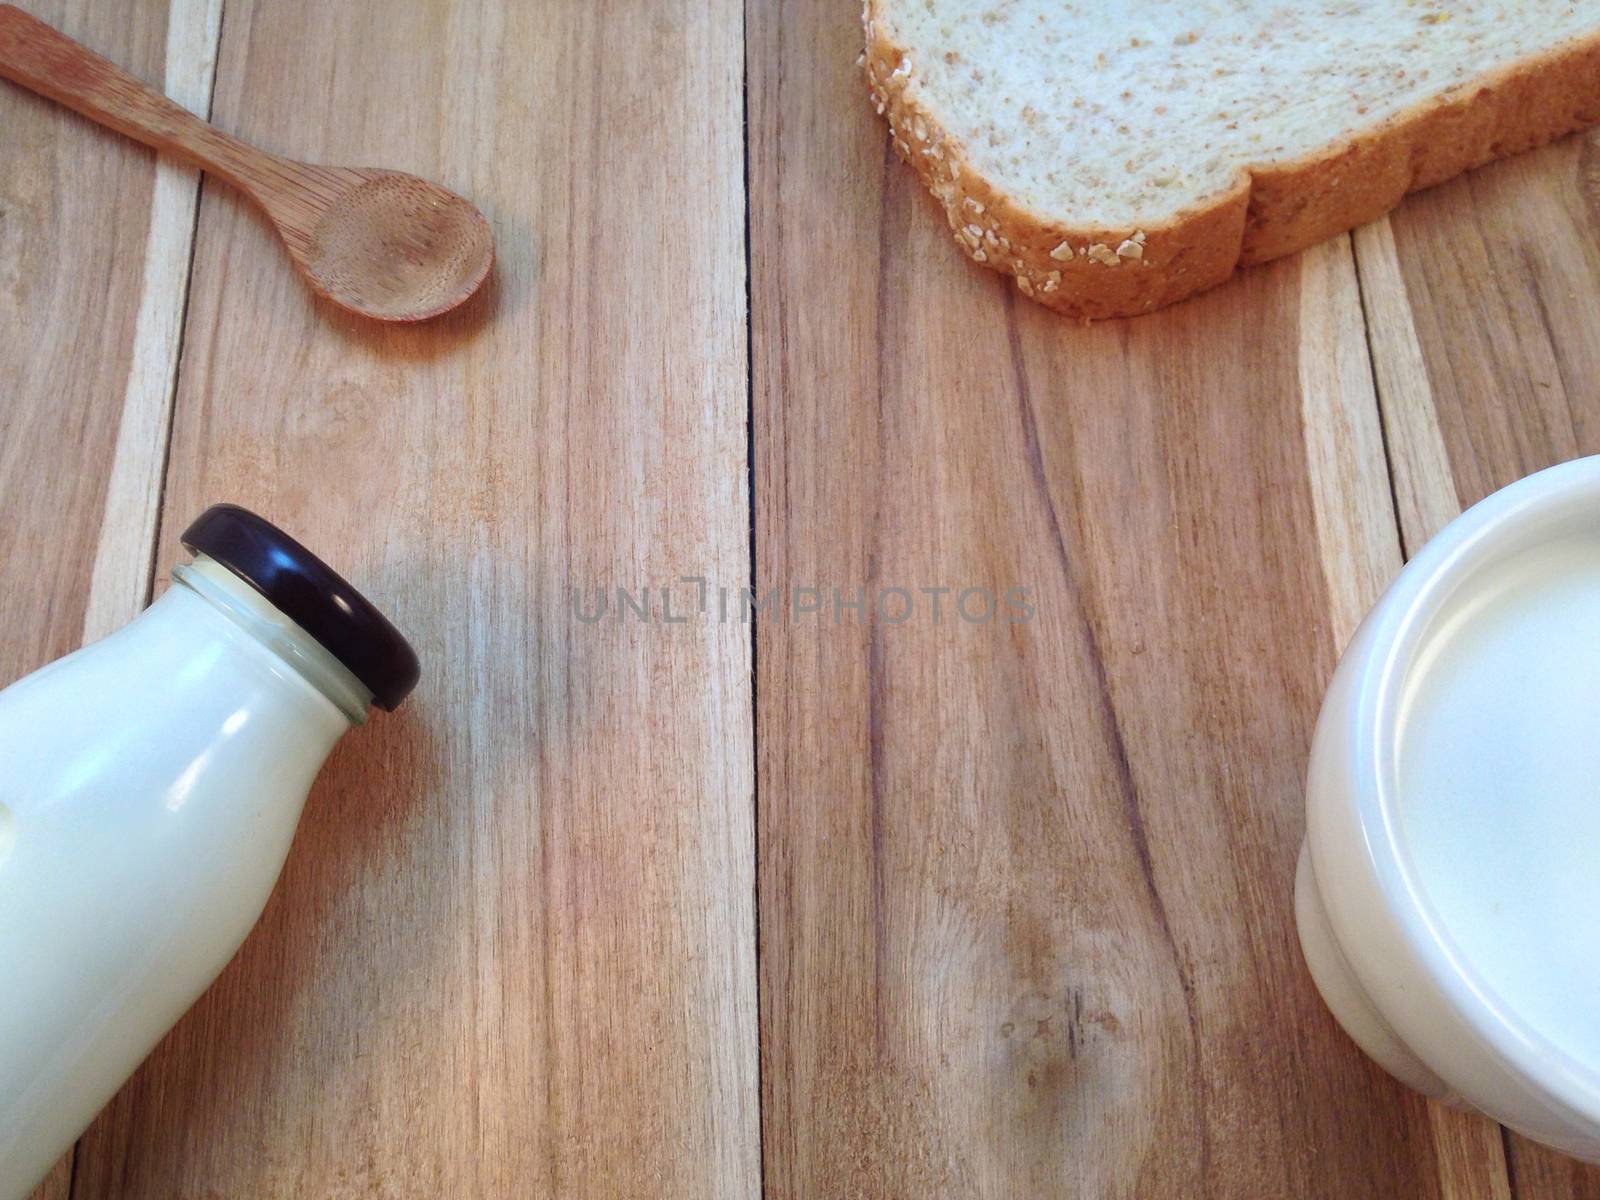 Slice of bread with bottle and cup of milk, wooden spoon on wooden background